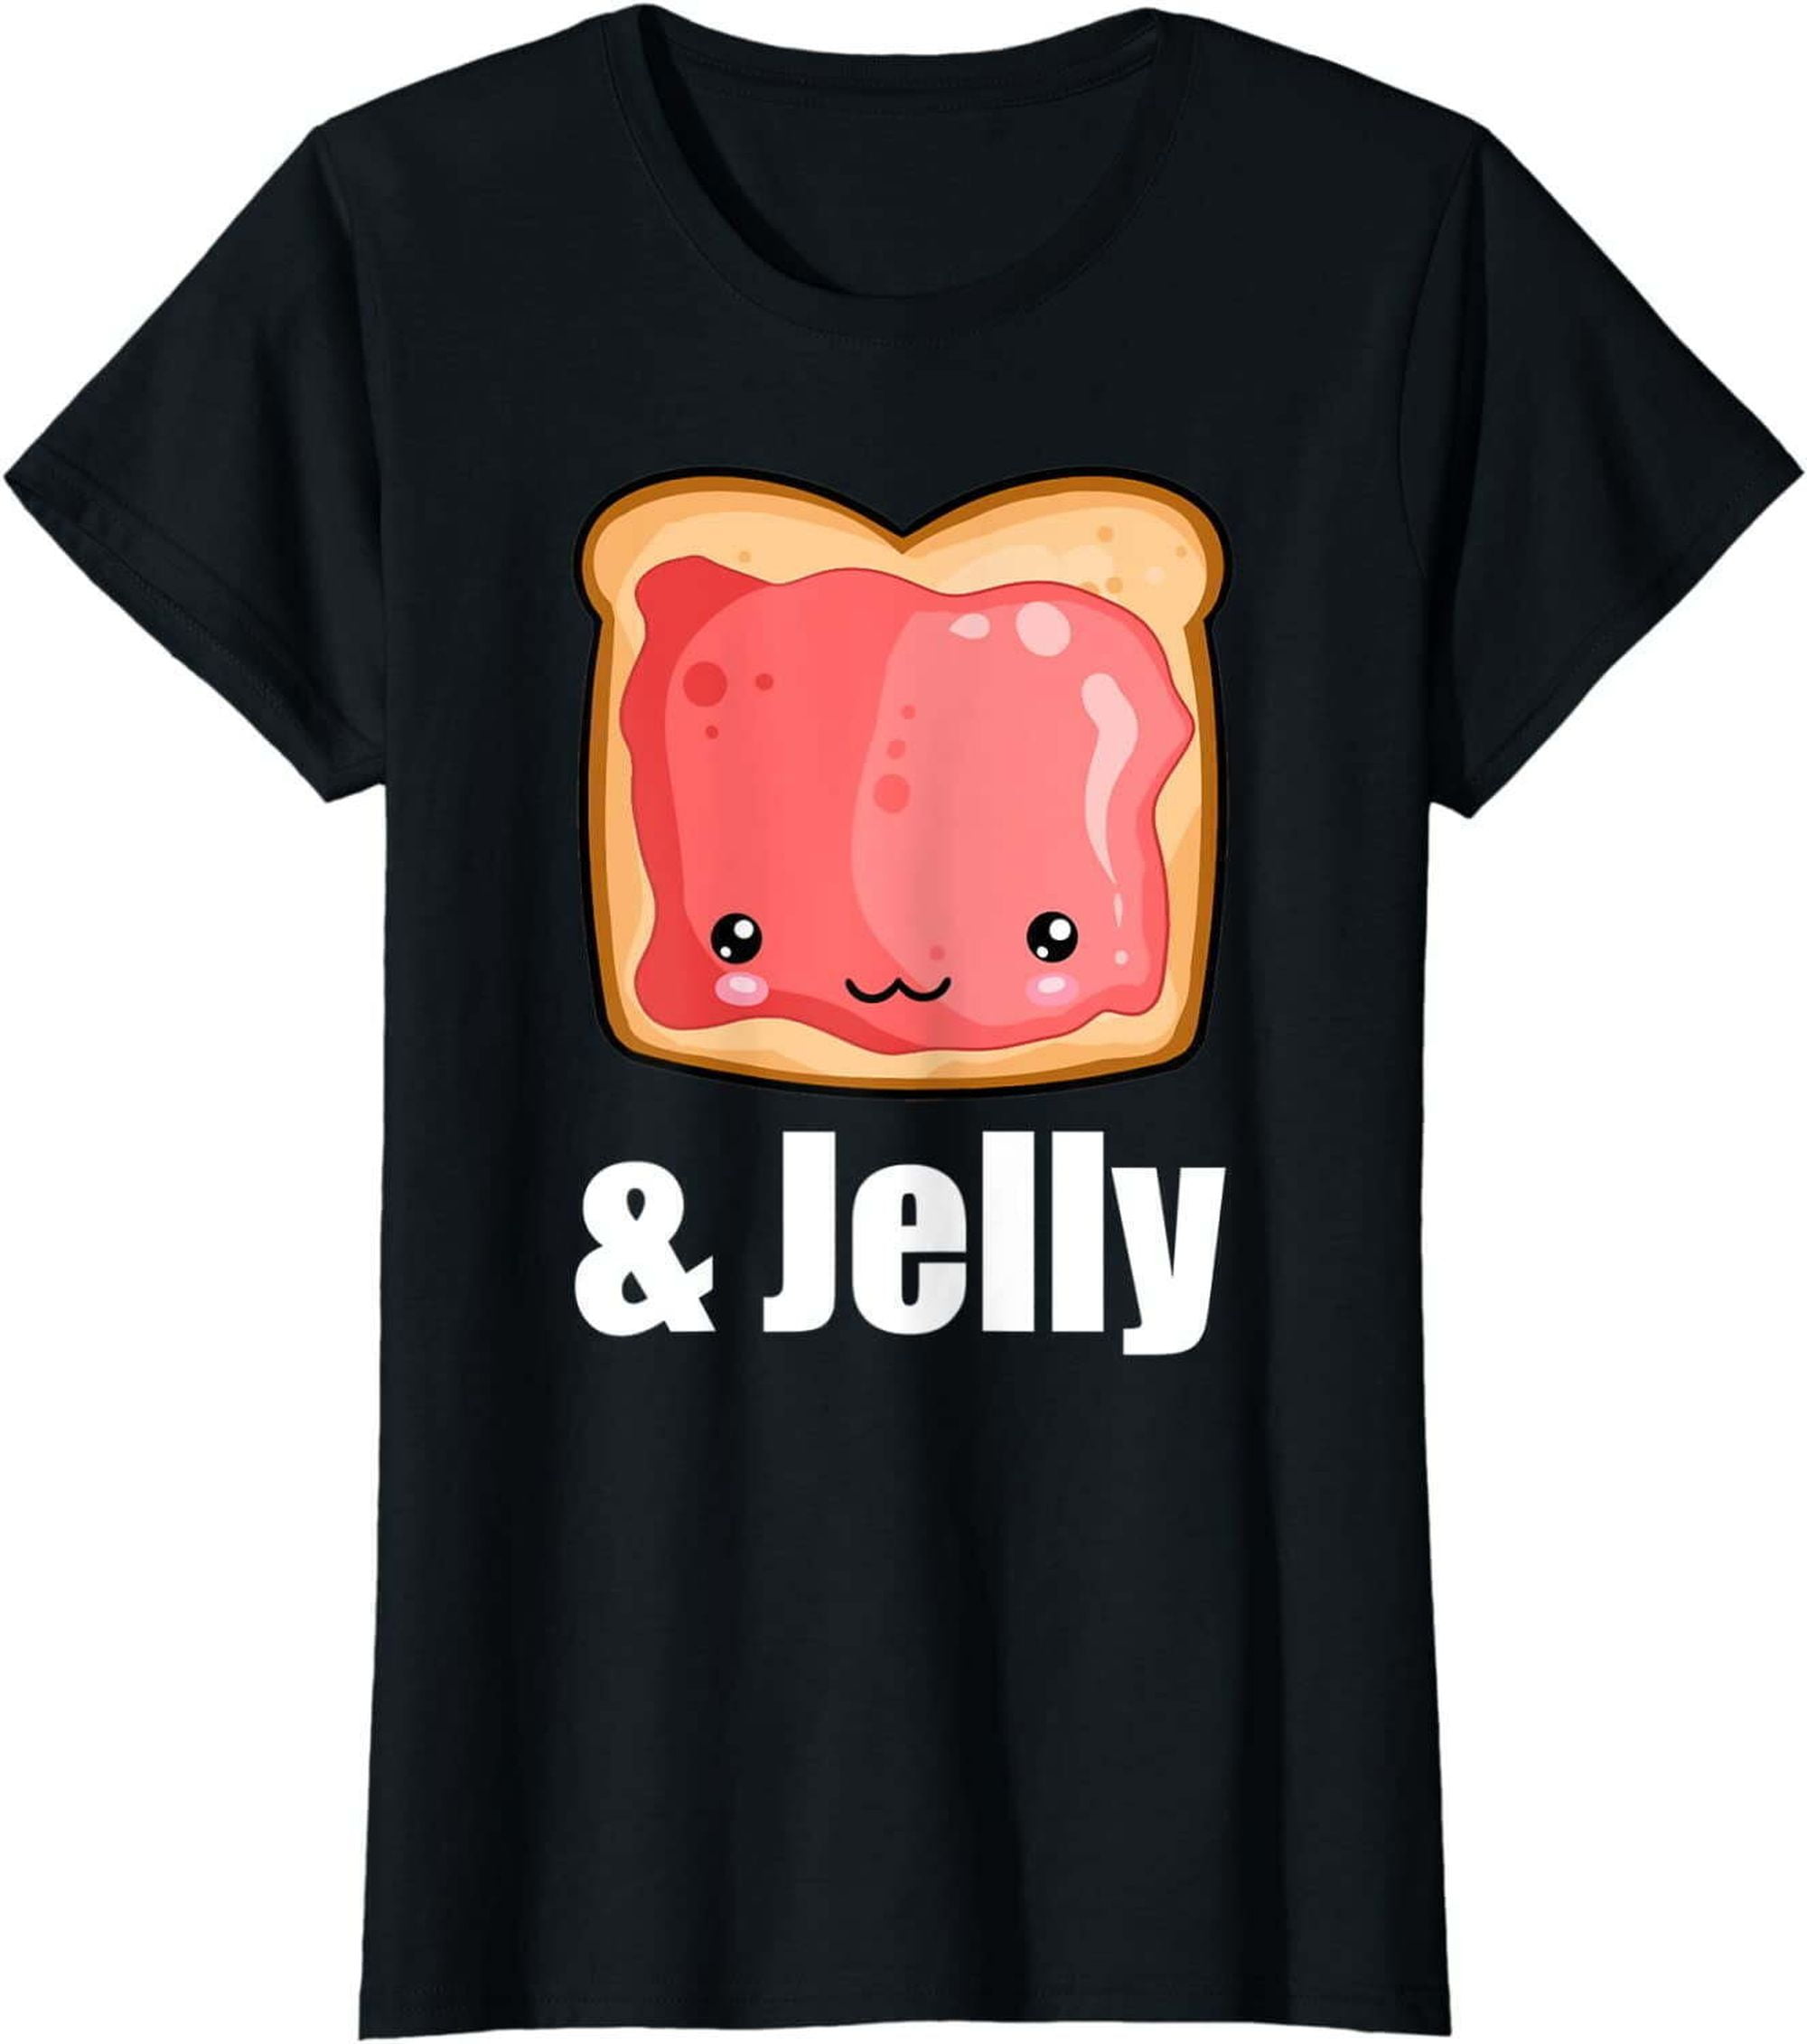 Love at First Bite: Cute PB&J Sandwich Tees for You and Your Sandwich ...